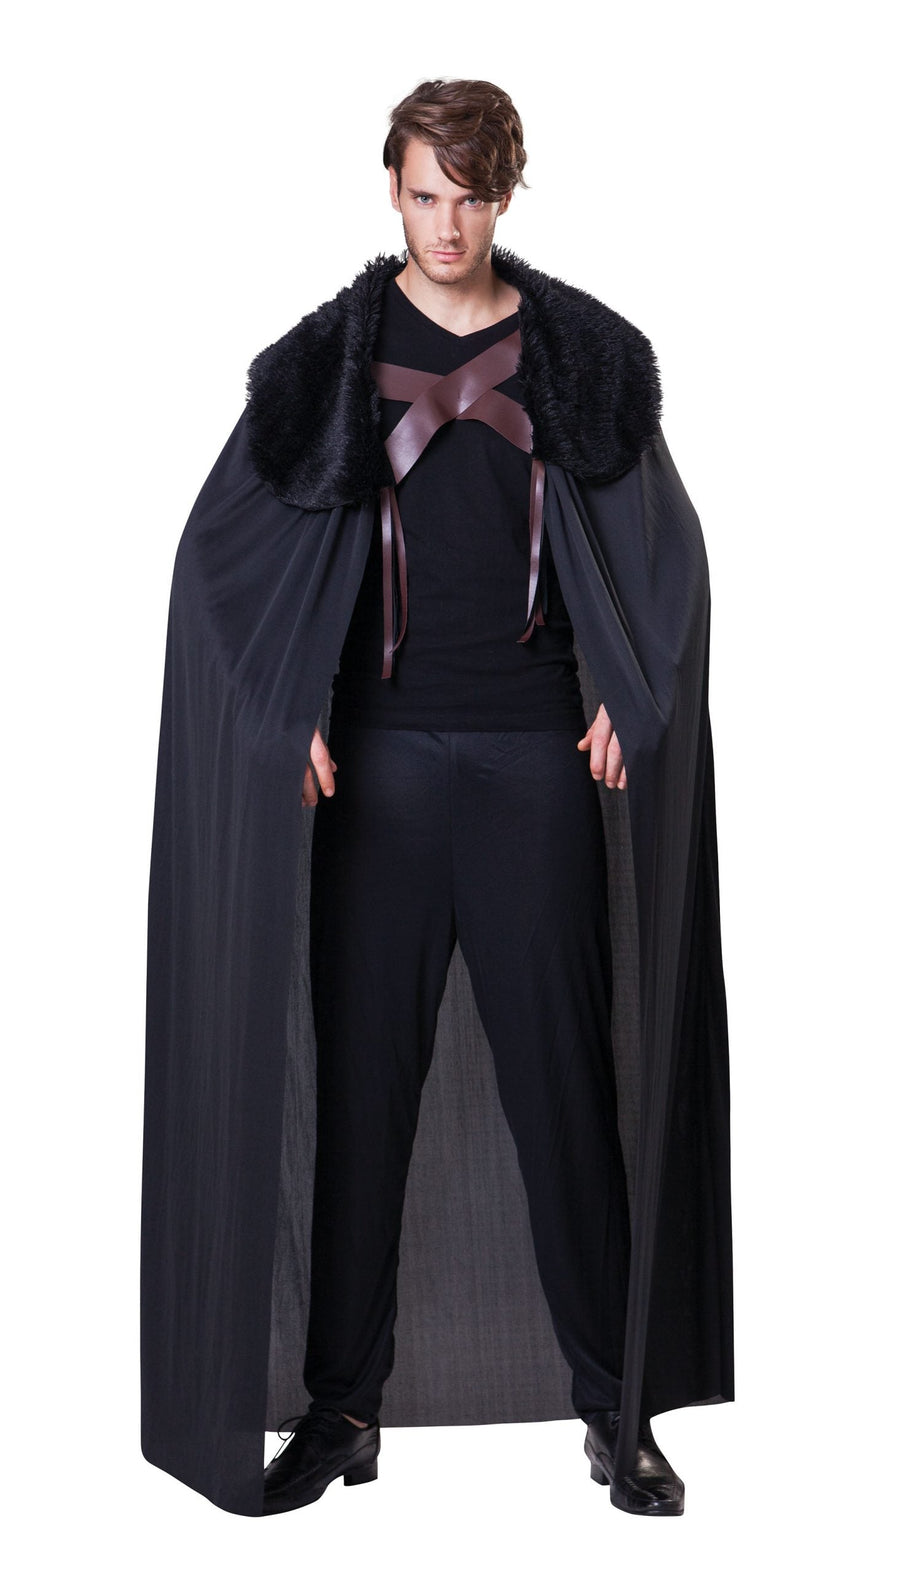 Cape Mens Hooded Black With Collar Adult Costume Male_1